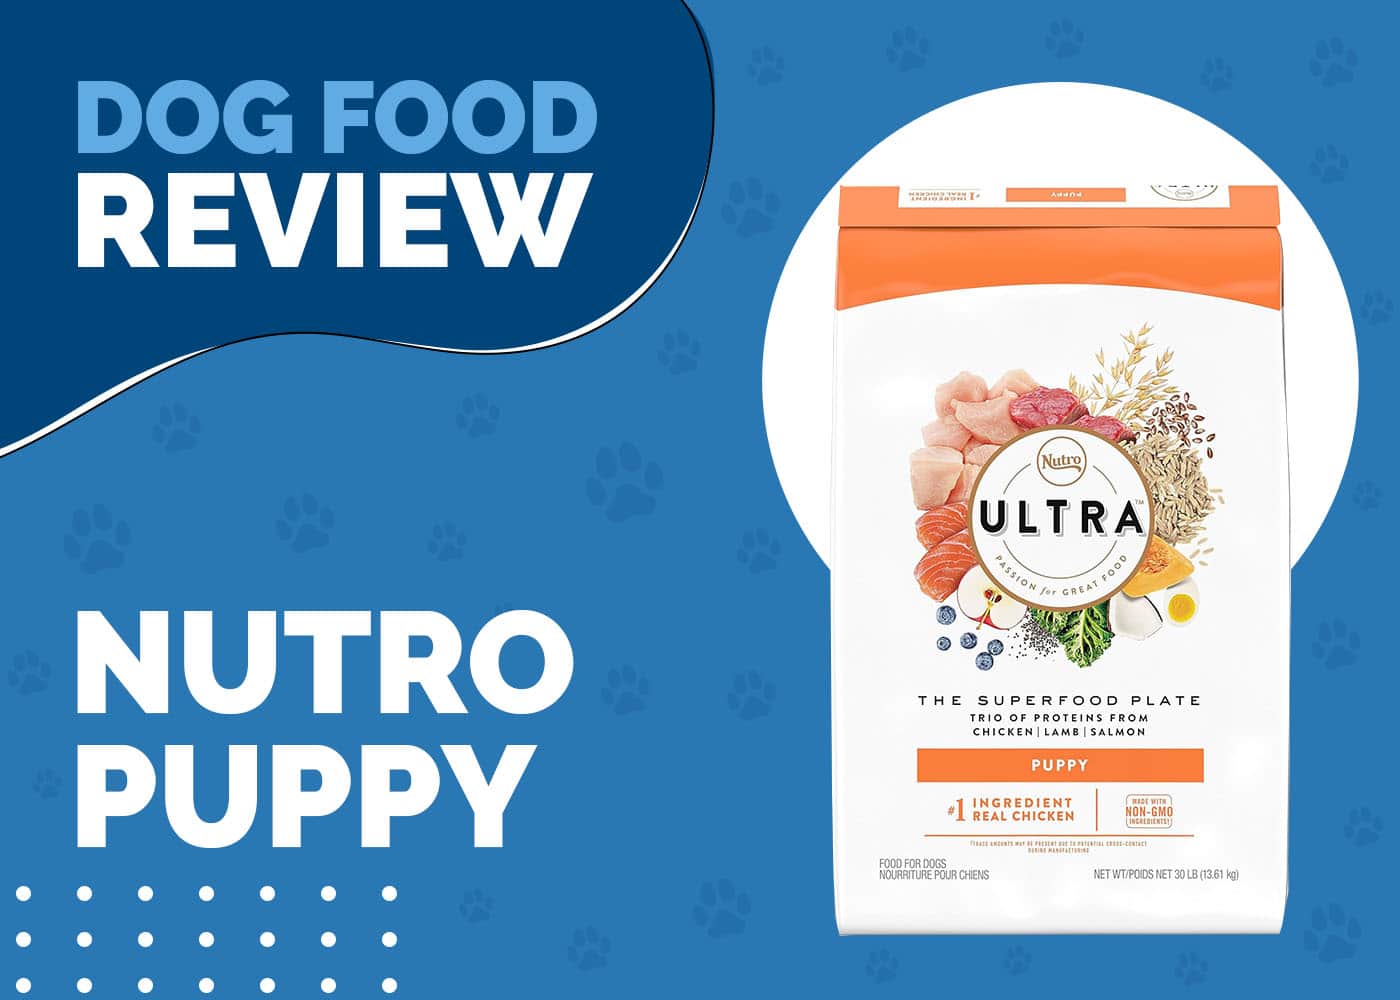 Nutro Puppy Dog Food Review